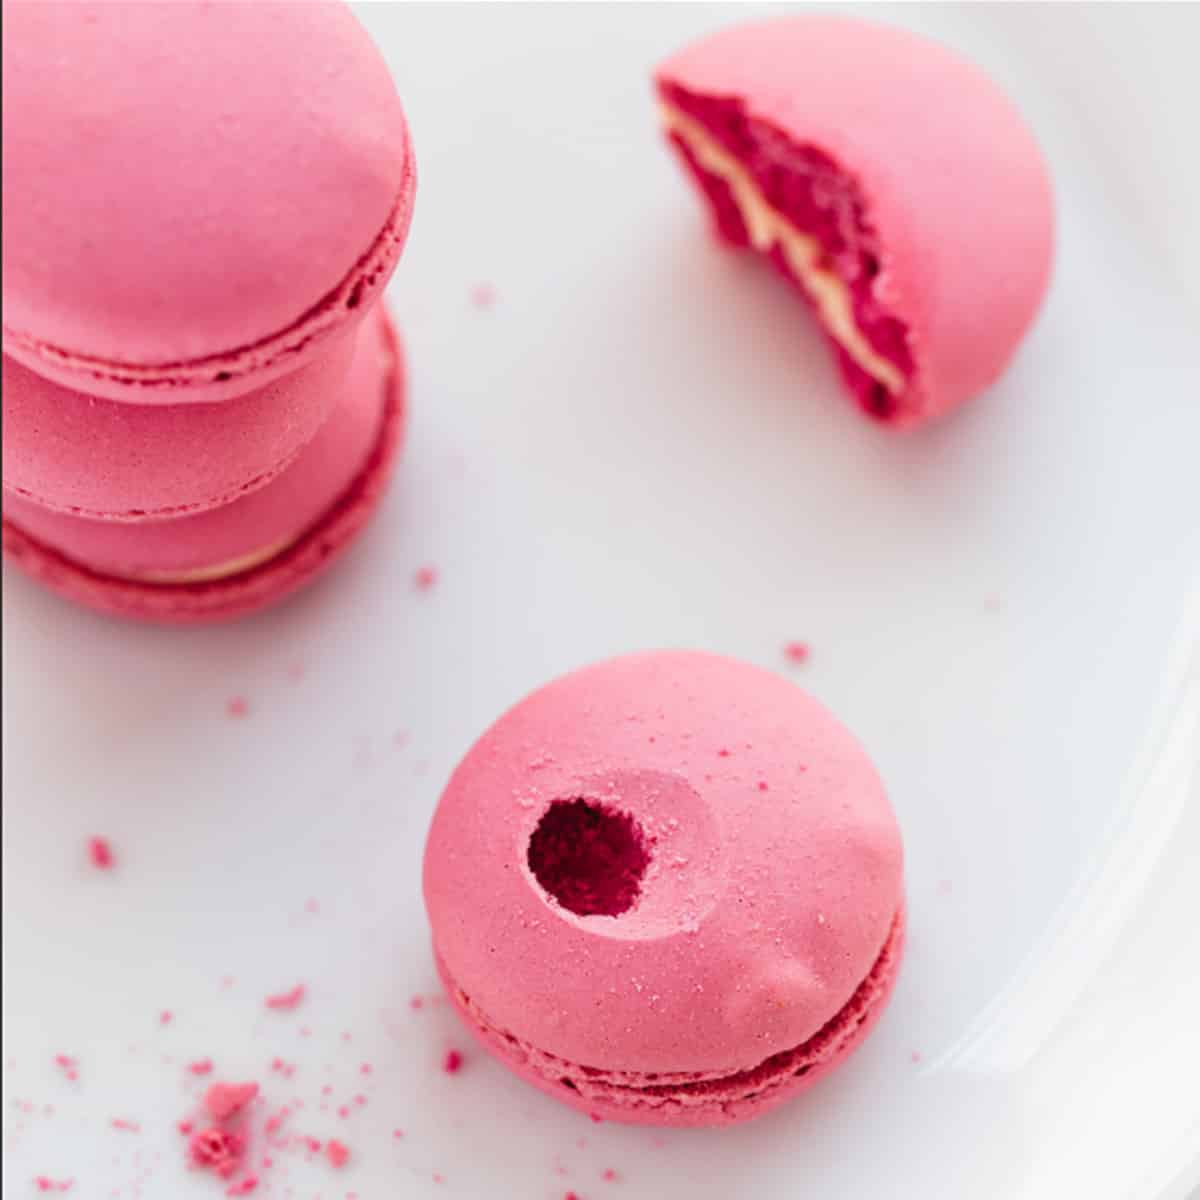 Everyone knows that making macarons is a tricky business. Even the most experienced pastry chefs can sometimes fall victim to a failed batch.